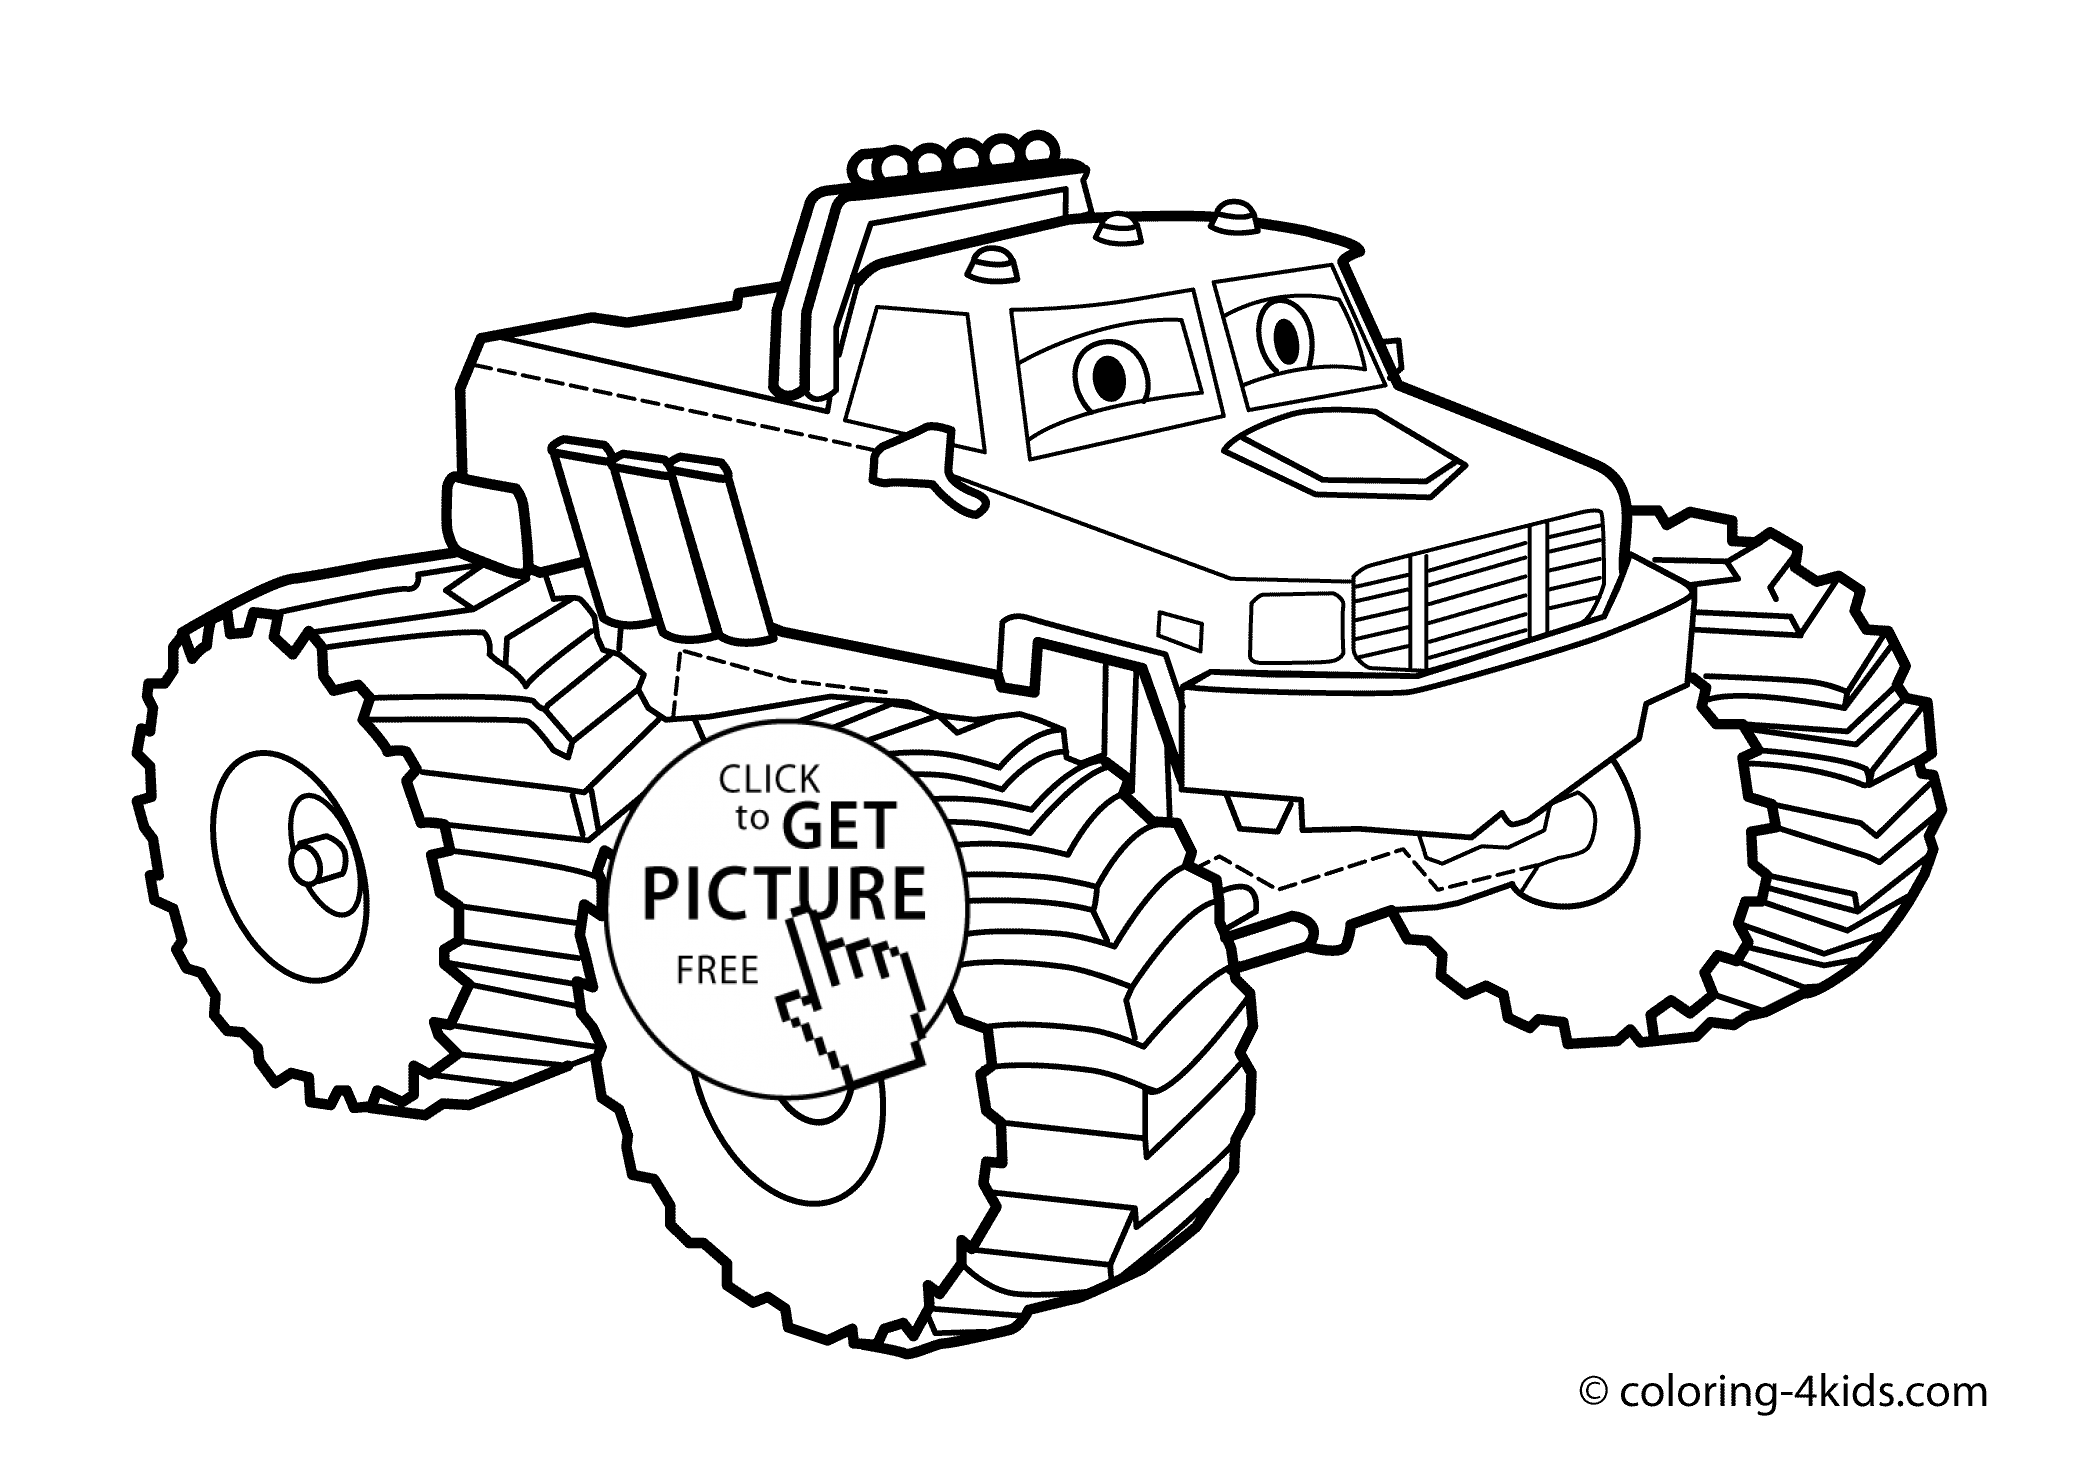 Transportation Coloring Pages - best transport coloring pages ...